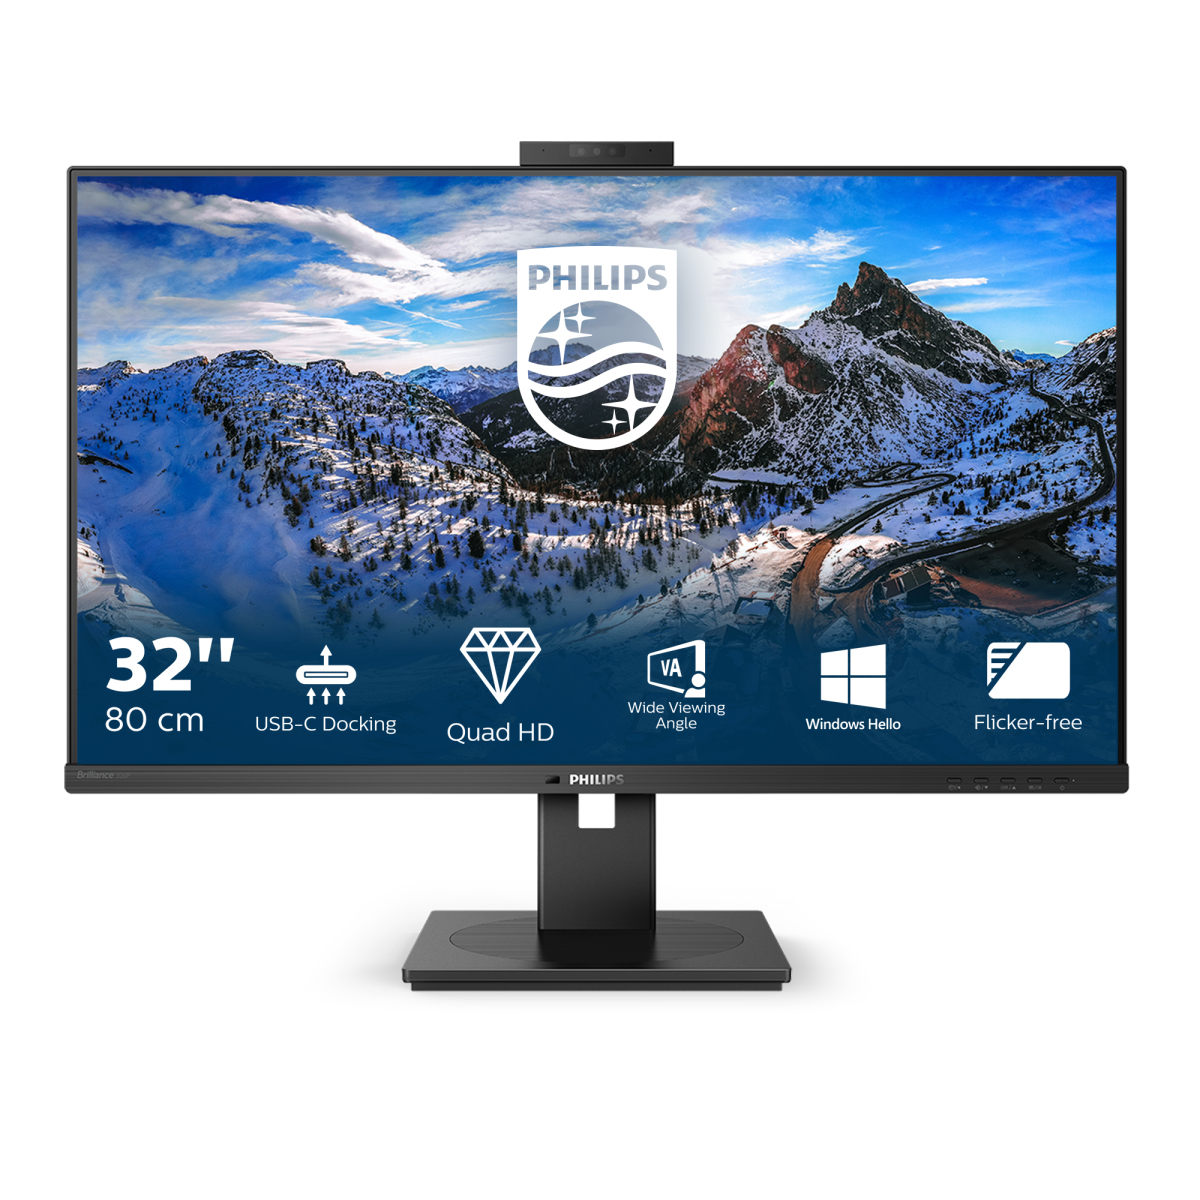 P Line LCD monitor with USB-C docking